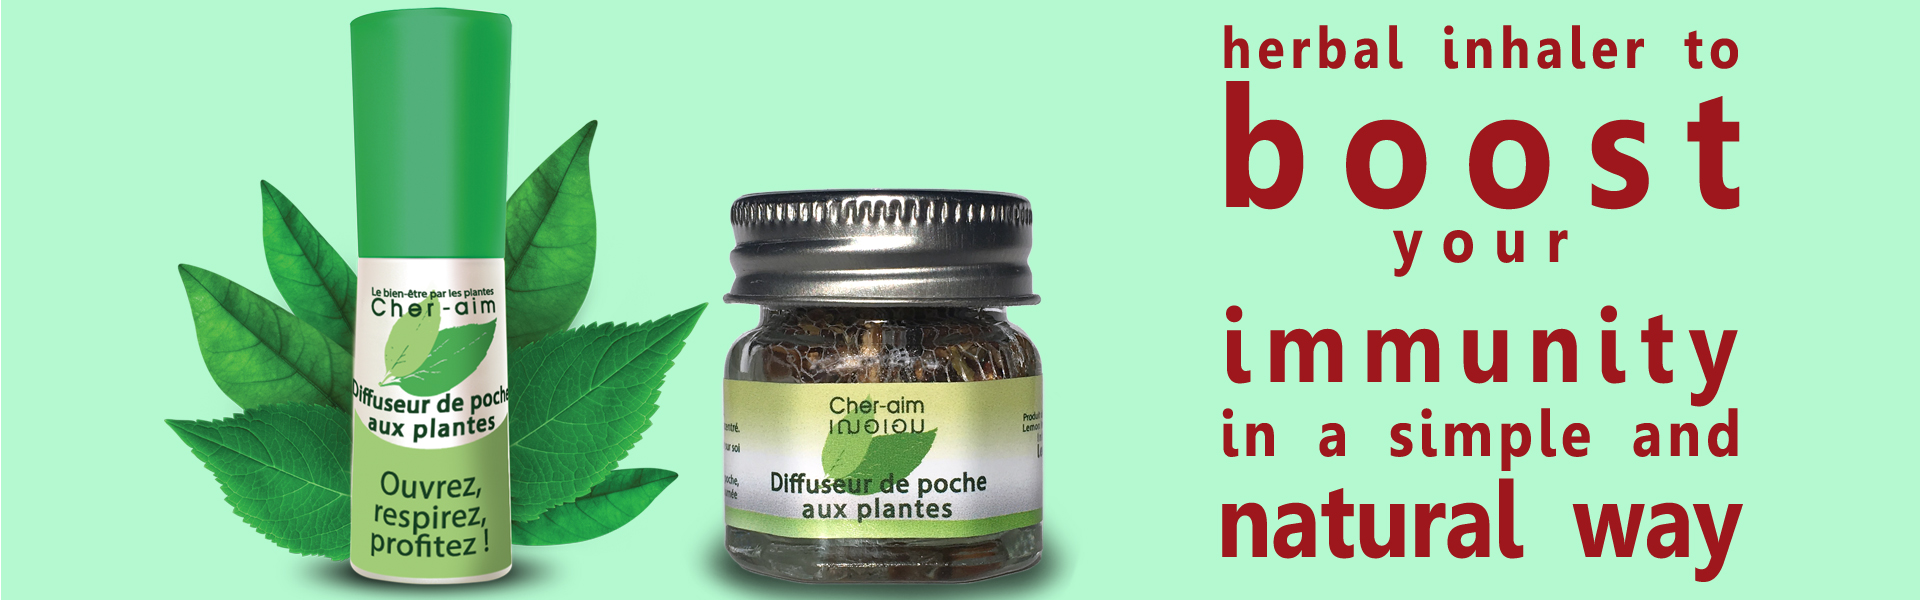 Our herbal inhaler : a handy accessory to boost your immunity in a simple & natural way.